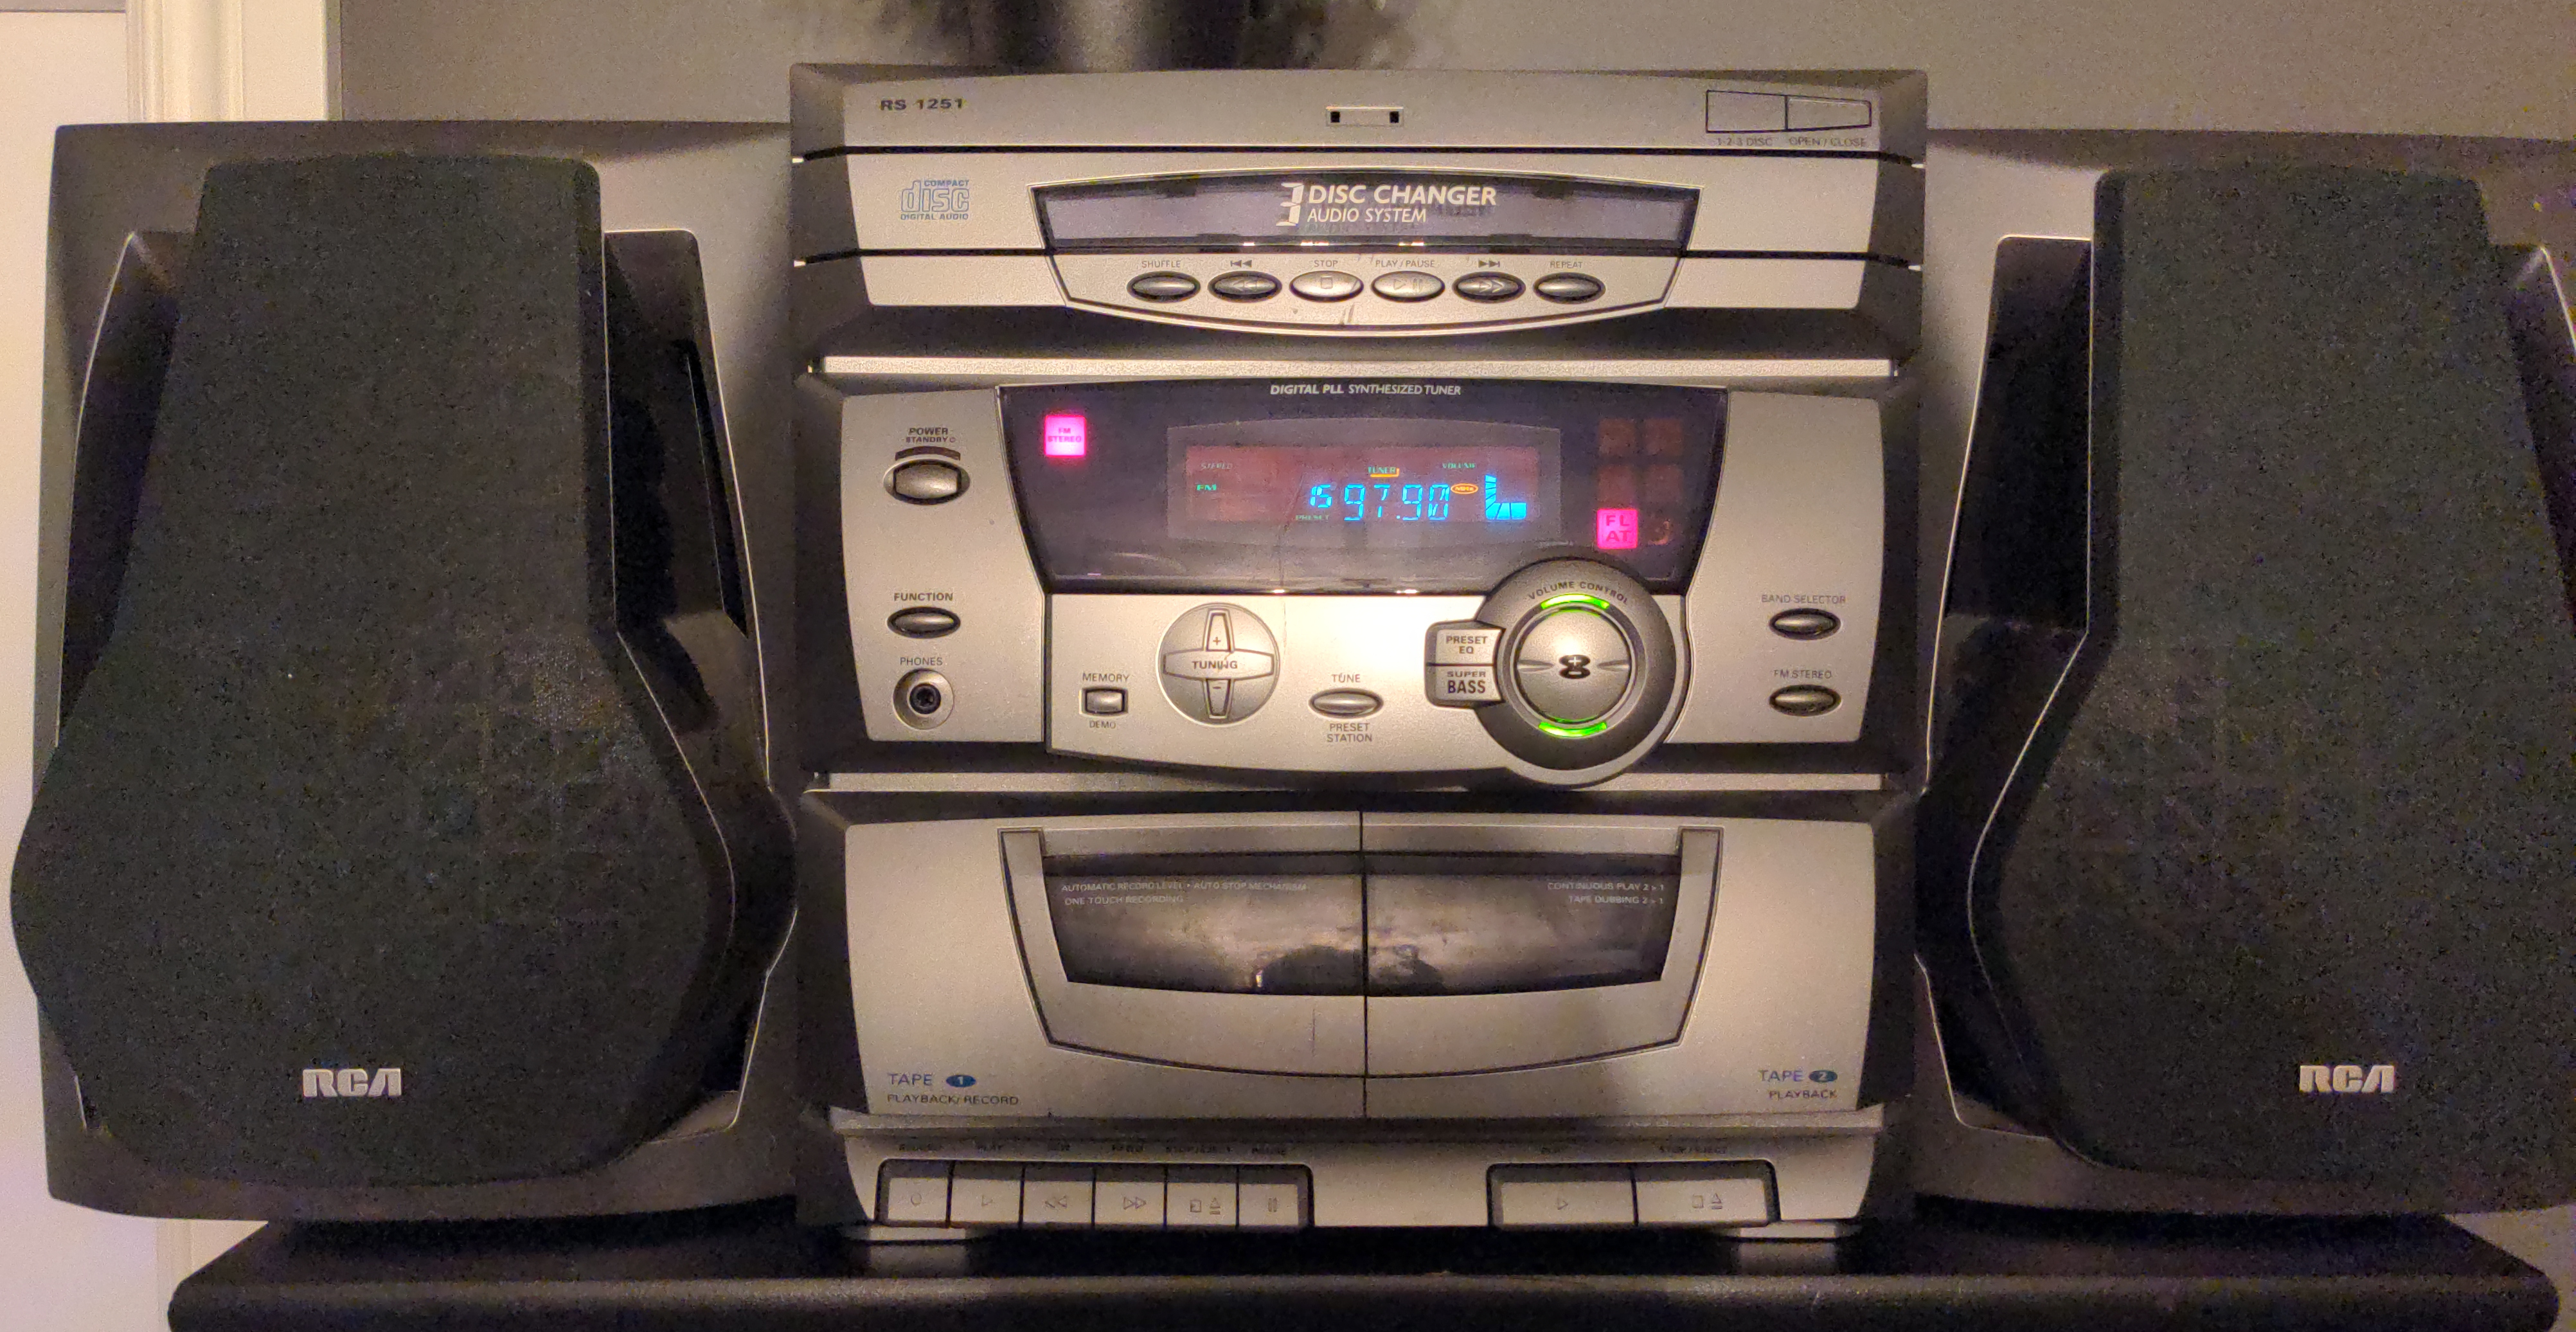 A turn-of-the-century RCA home stereo system consisting of two bookshelf speakers and a central unit featuring a 3-disc CD changer, an AM/FM radio, and dual tape decks for dubbing, as well as five EQ presets and a "Super Bass" button.